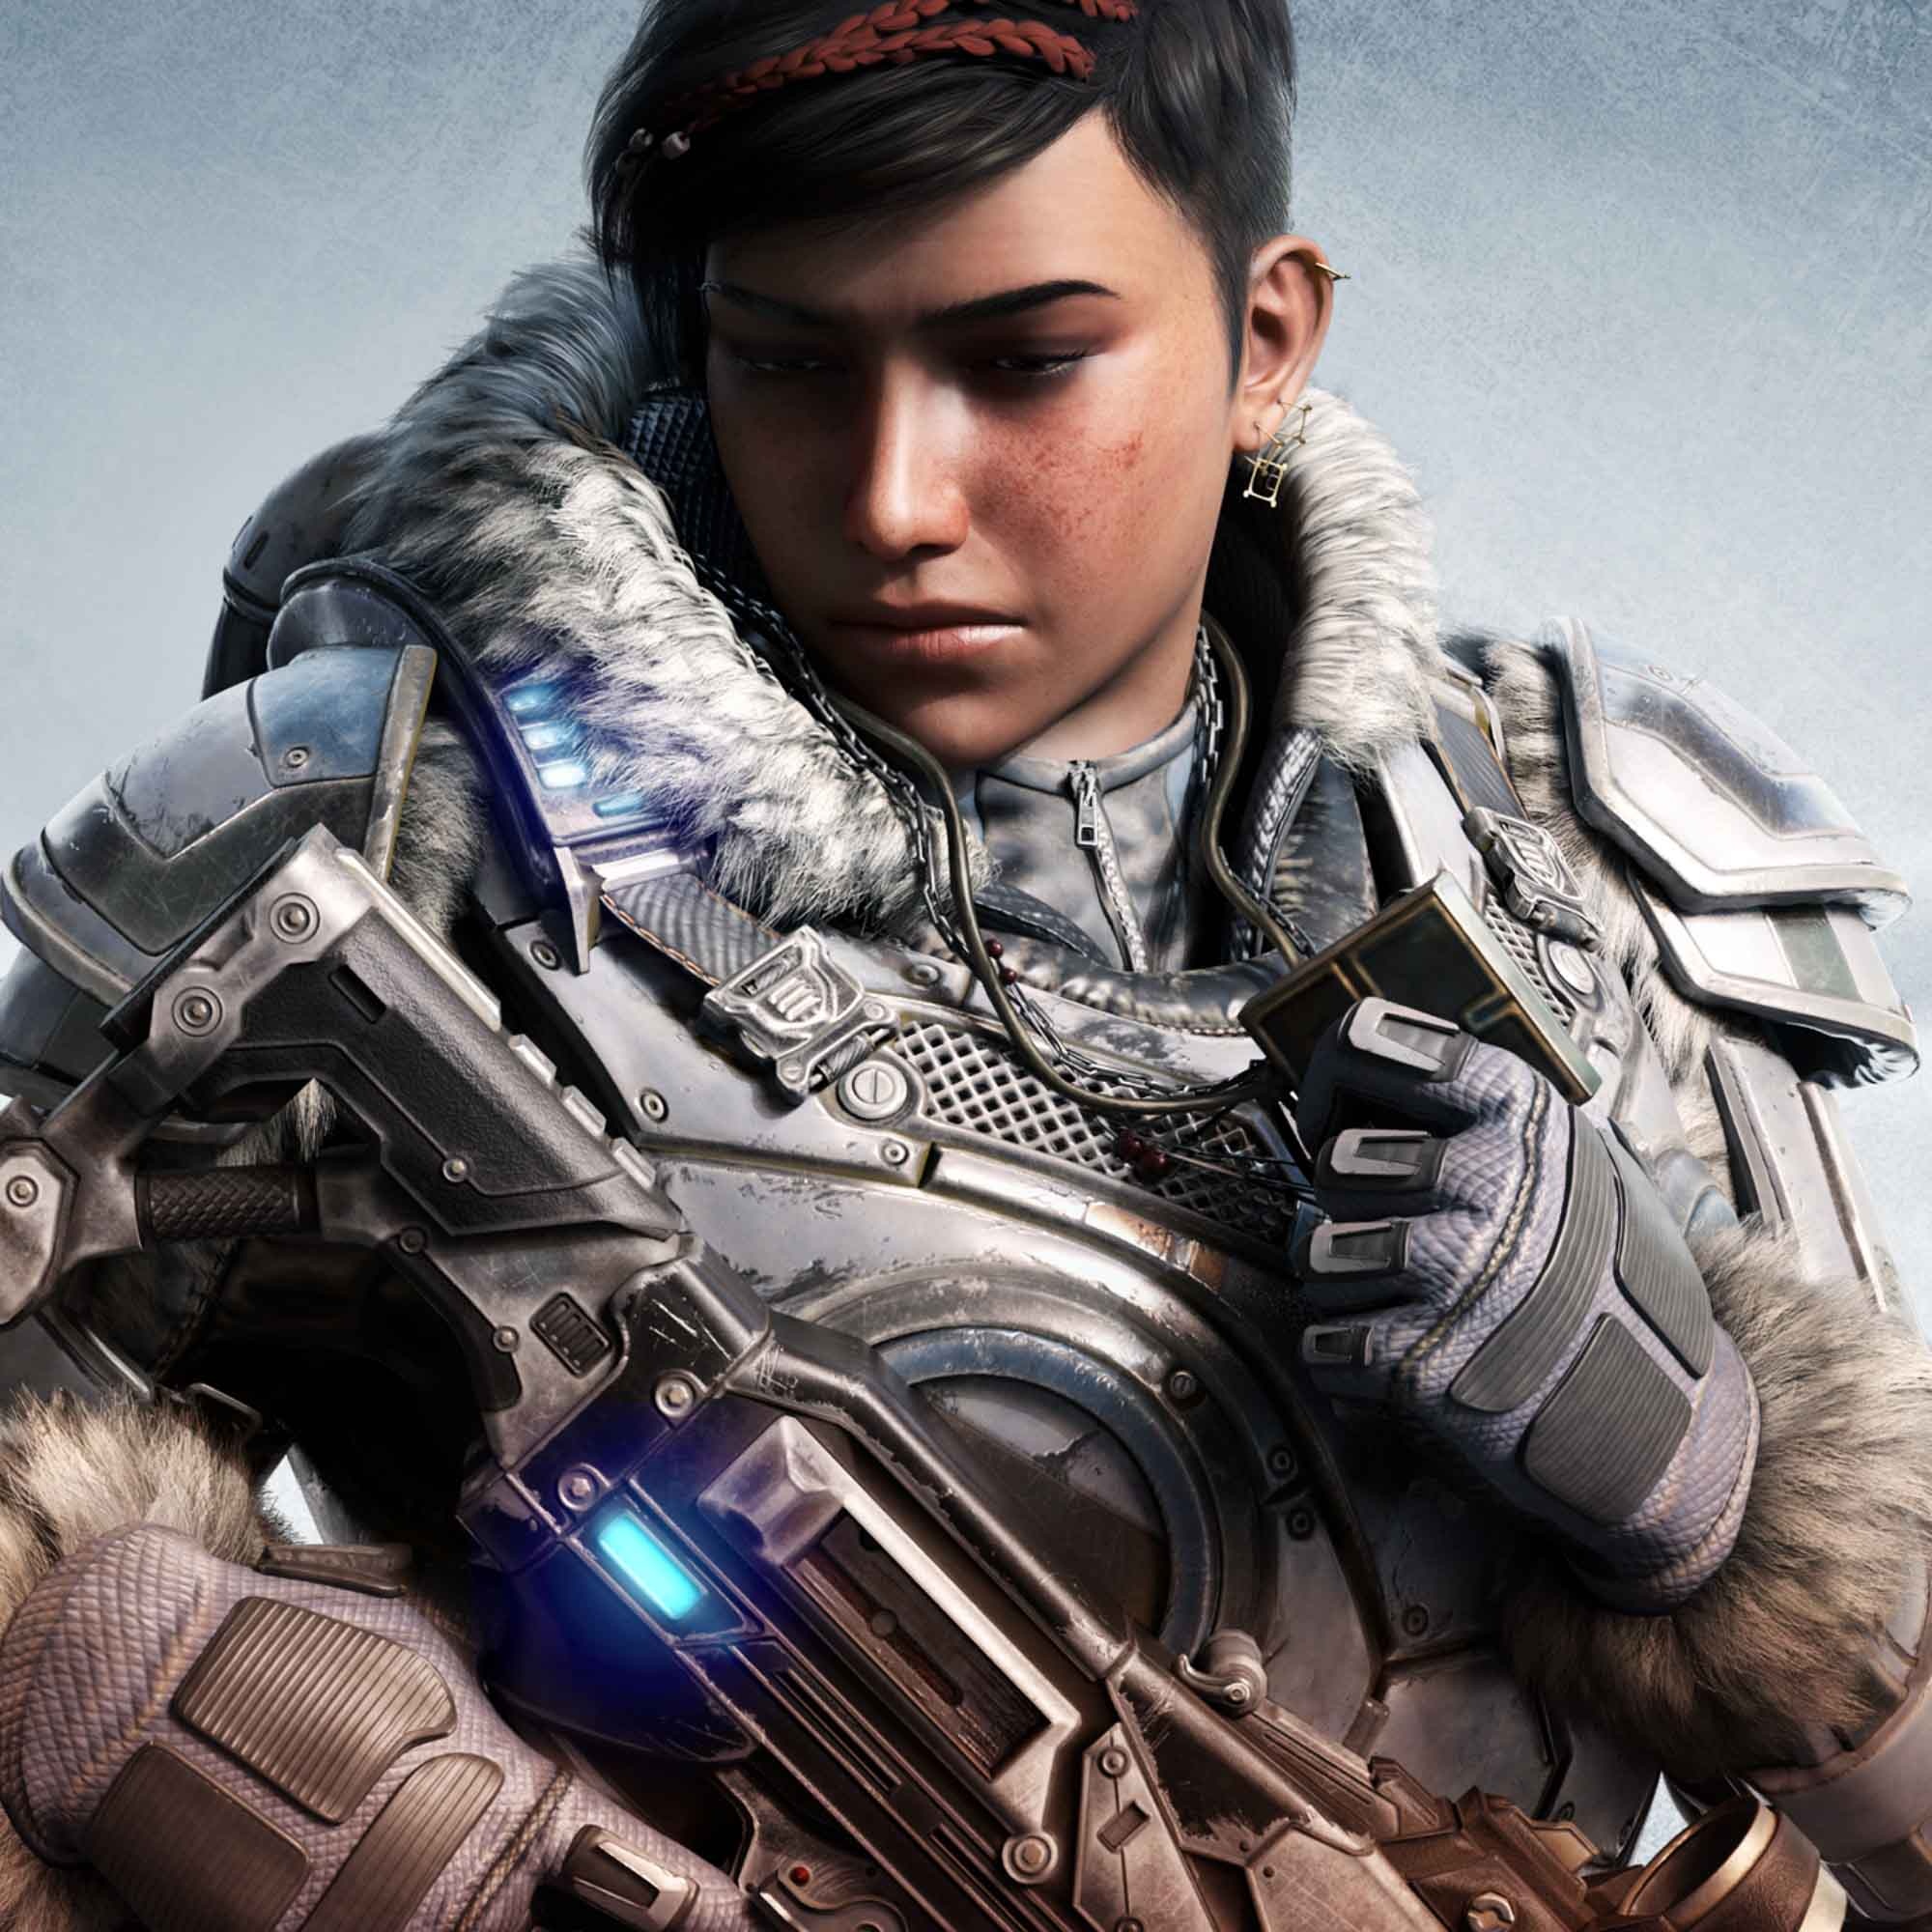 Gears 5 experience, Intense action, Futuristic warfare, Iconic characters, 2000x2000 HD Handy